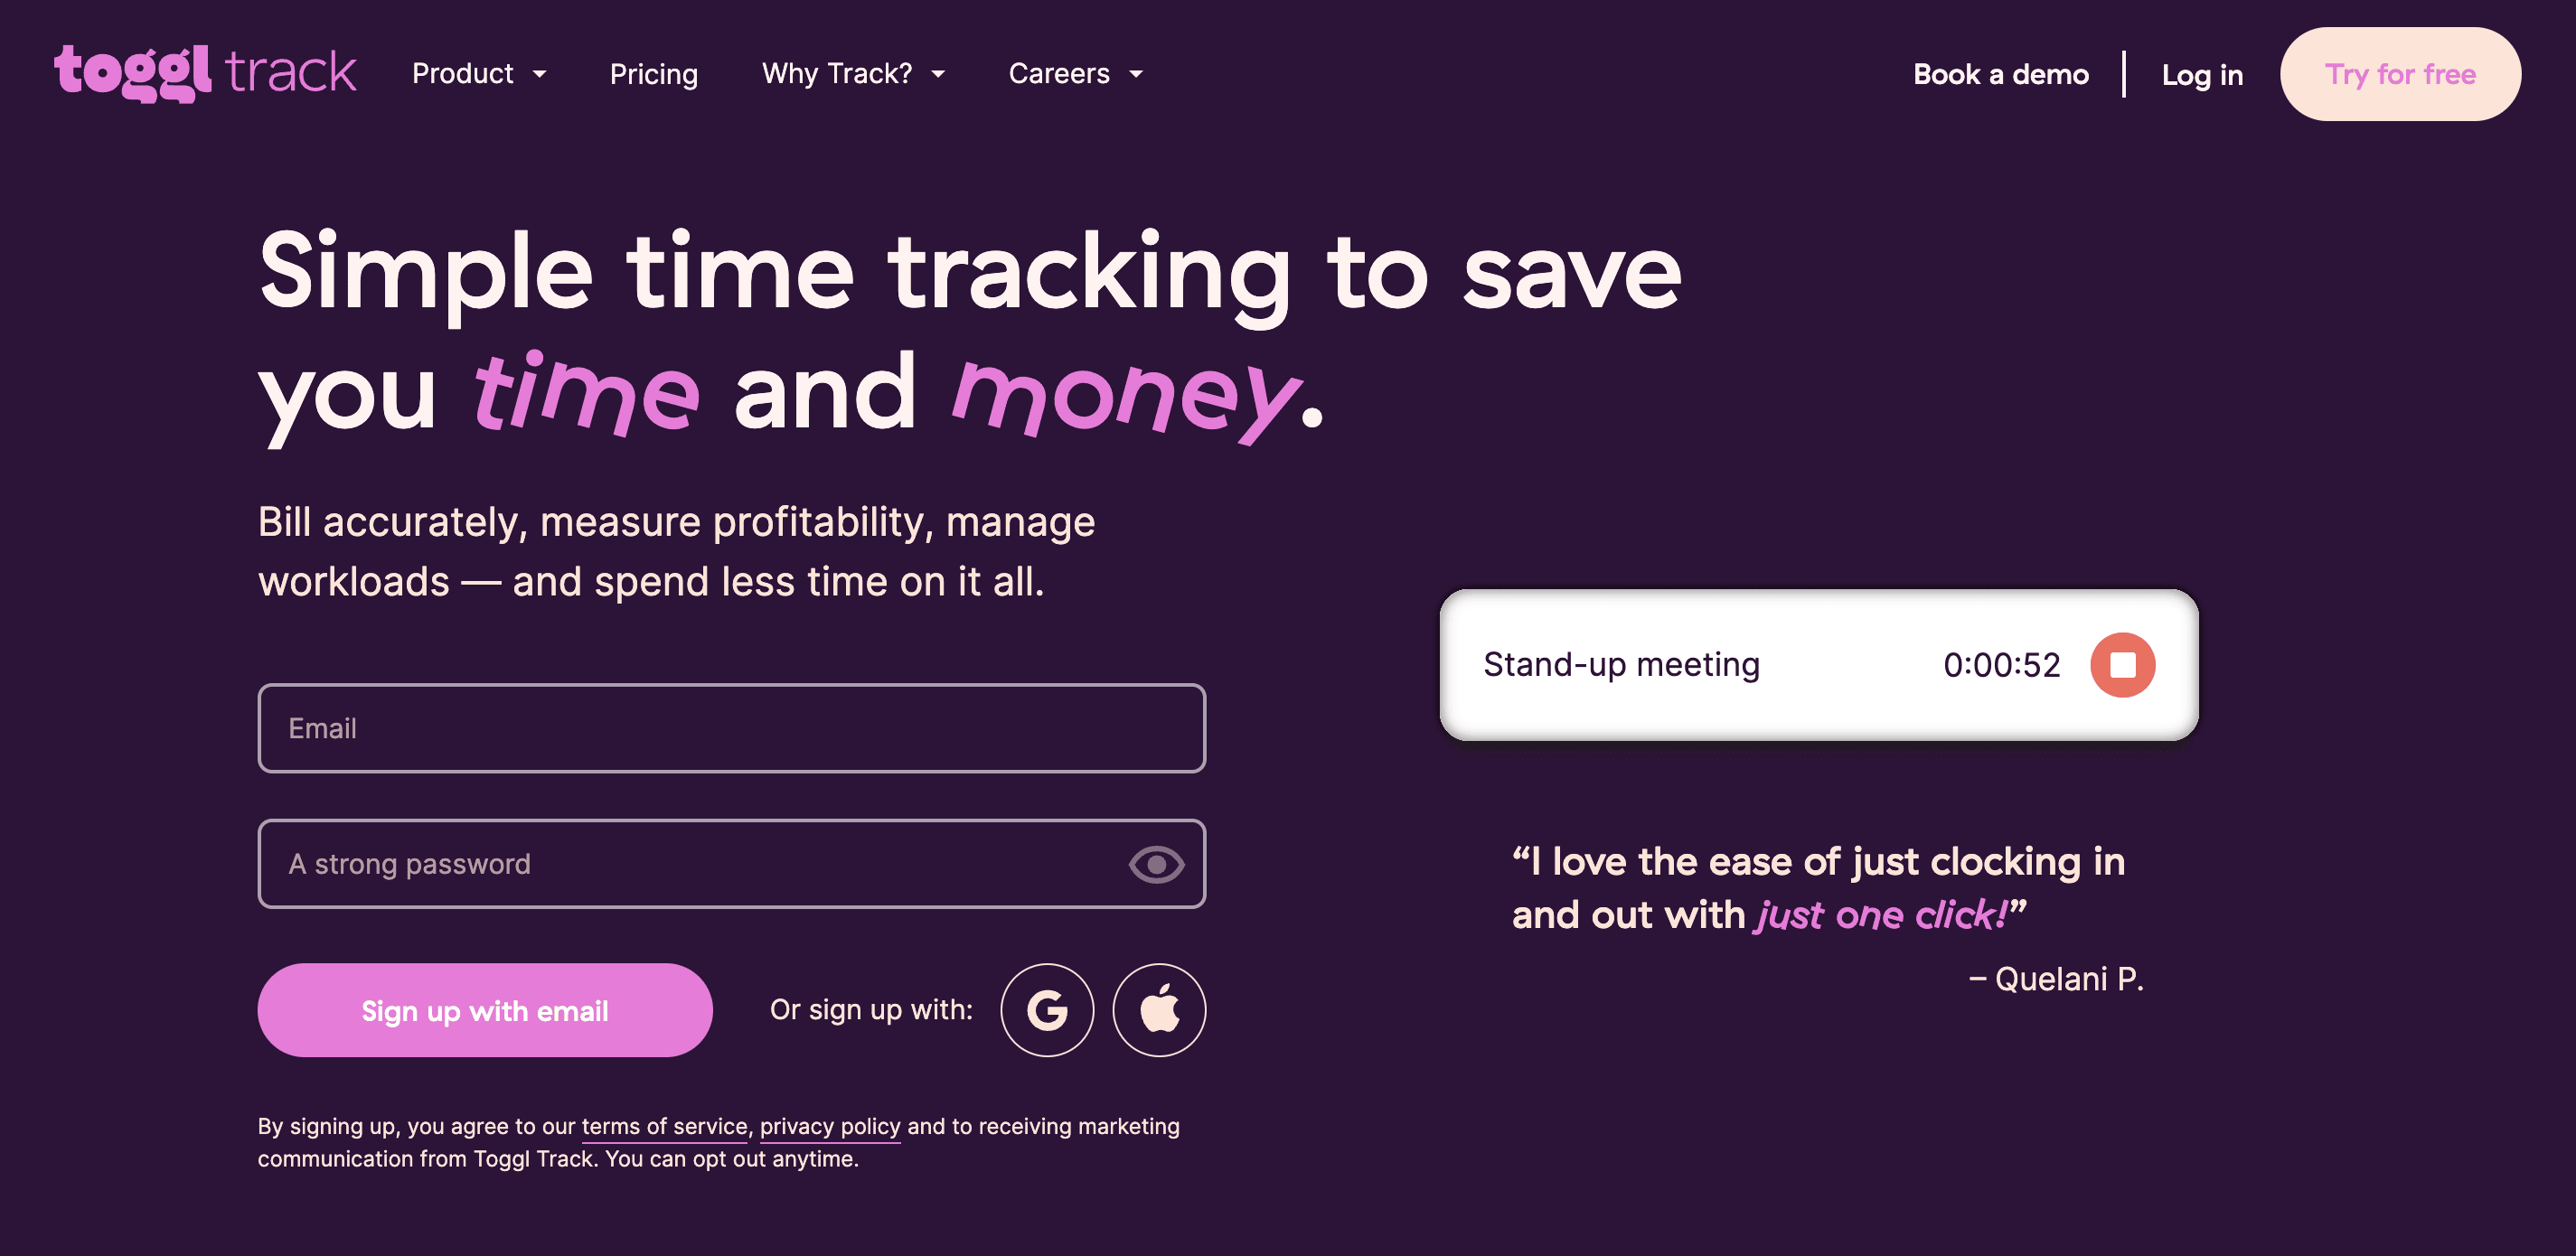 Toggl Track homepage